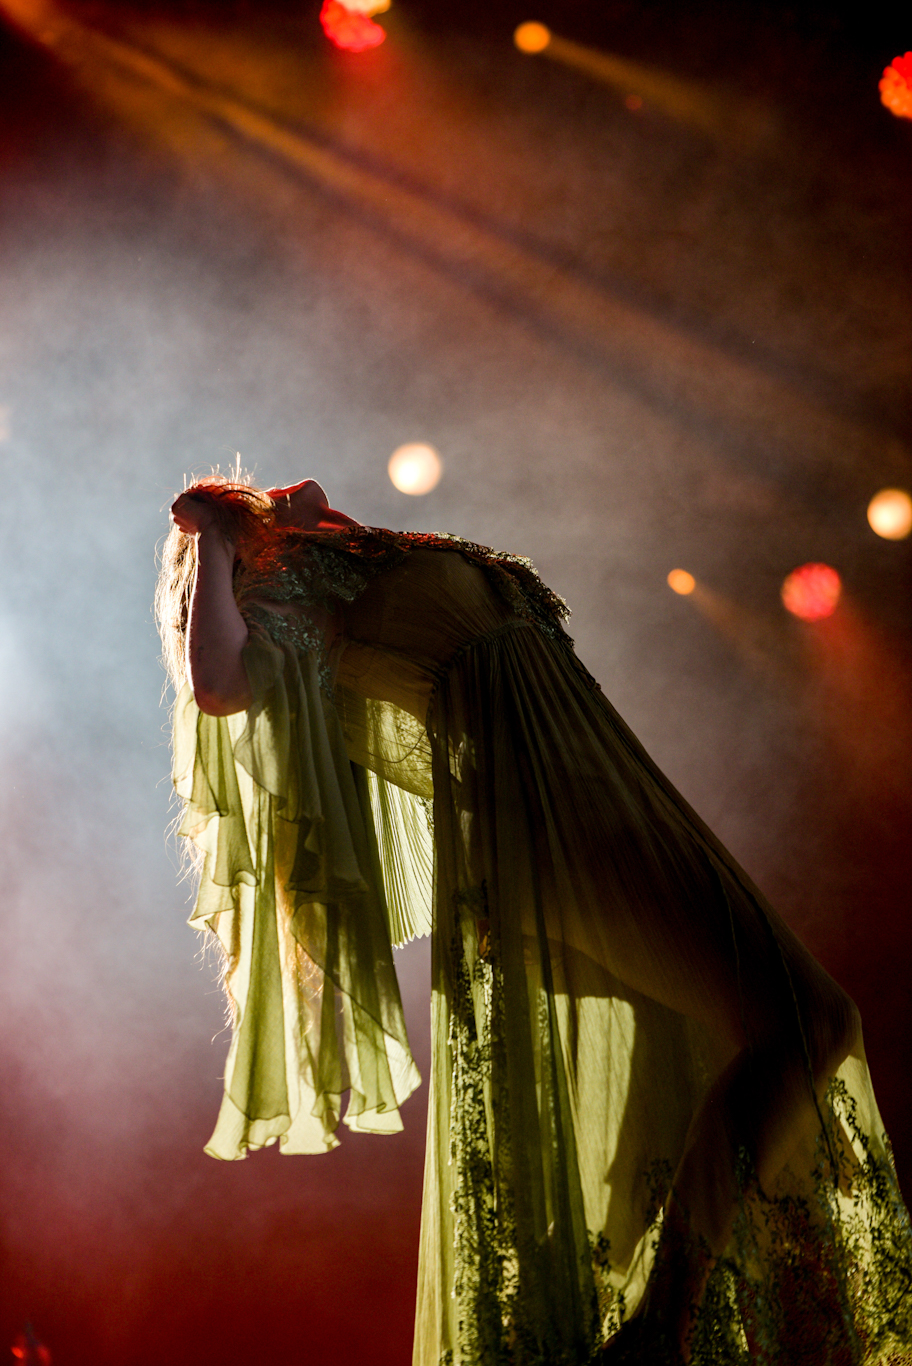 IN FOCUS// Florence & the Machine at Belsonic, Ormeau Park © Bernie McAllister